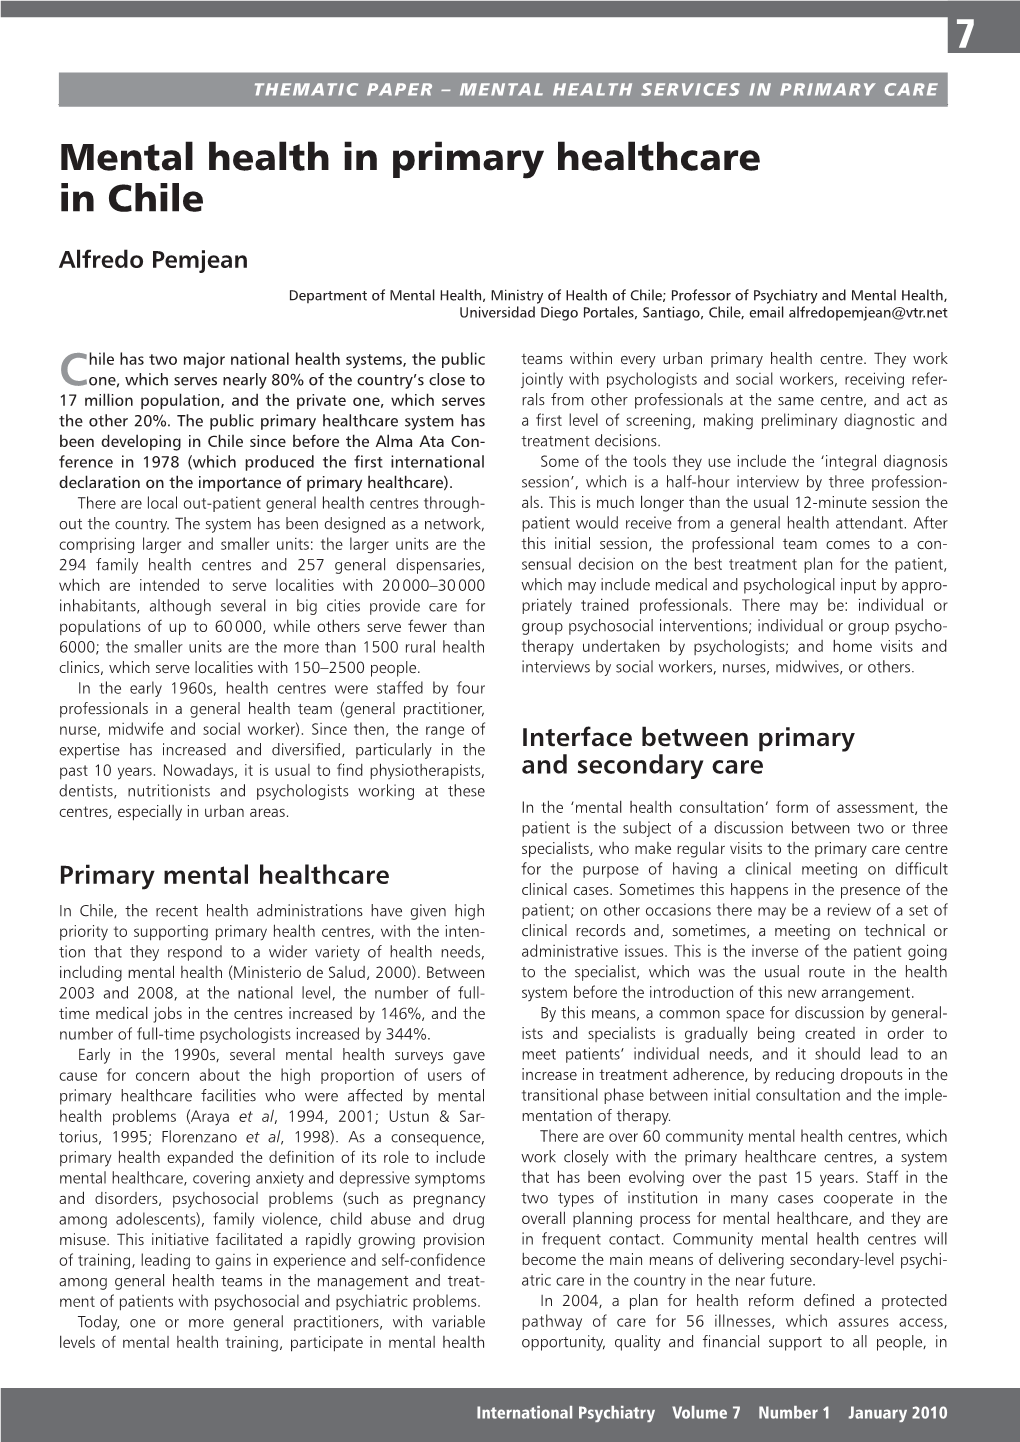 Mental Health in Primary Healthcare in Chile